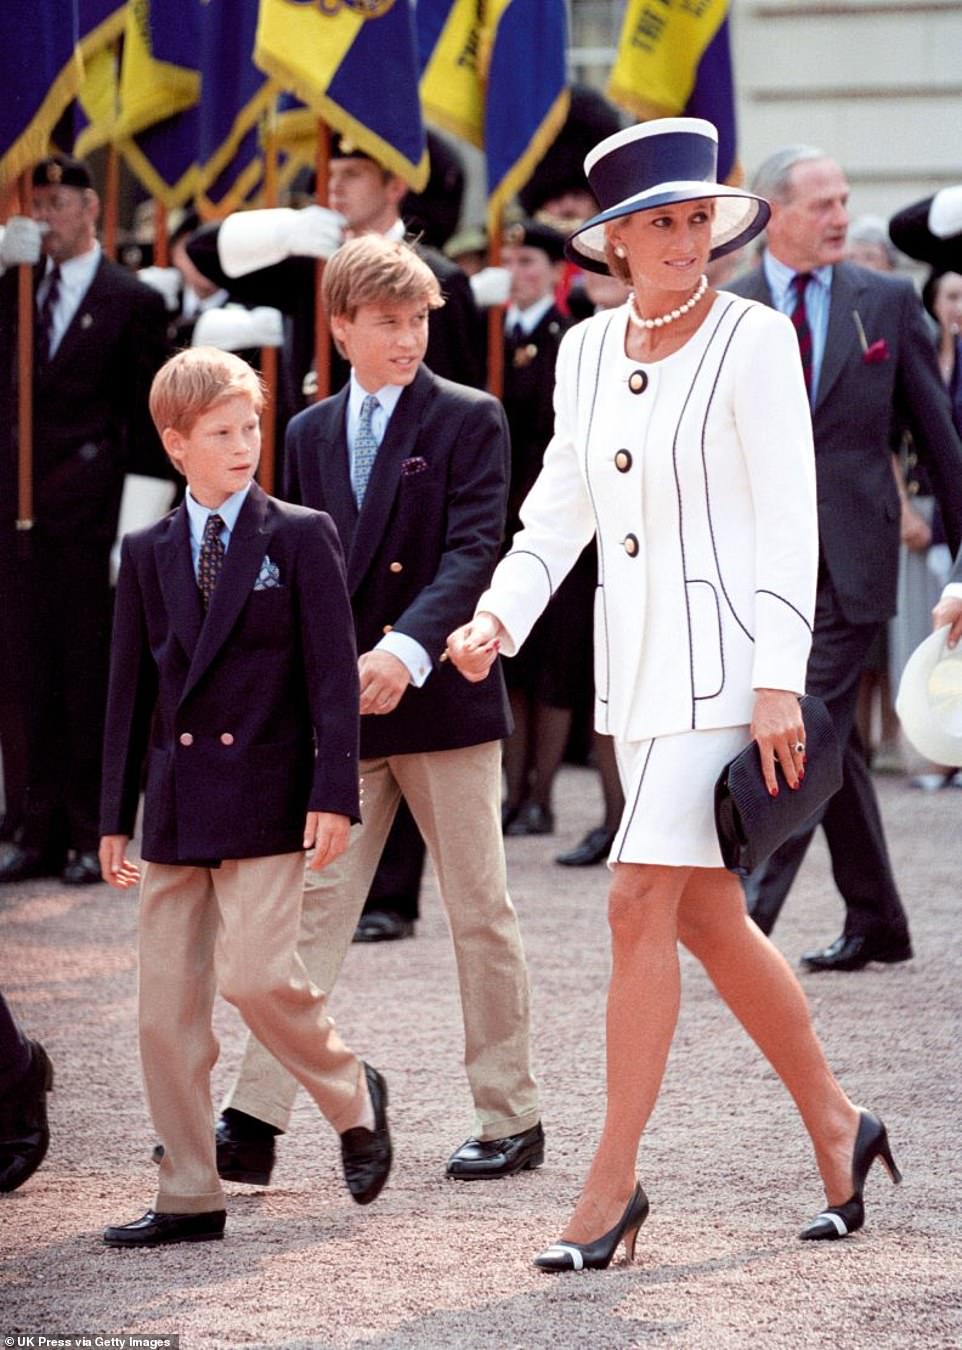 In a statement last night, Prince William told of his 'indescribable sadness' that the controversial Panorama interview increased his mother's 'fear, paranoia and isolation' in her final years. Pictured: Diana with her sons